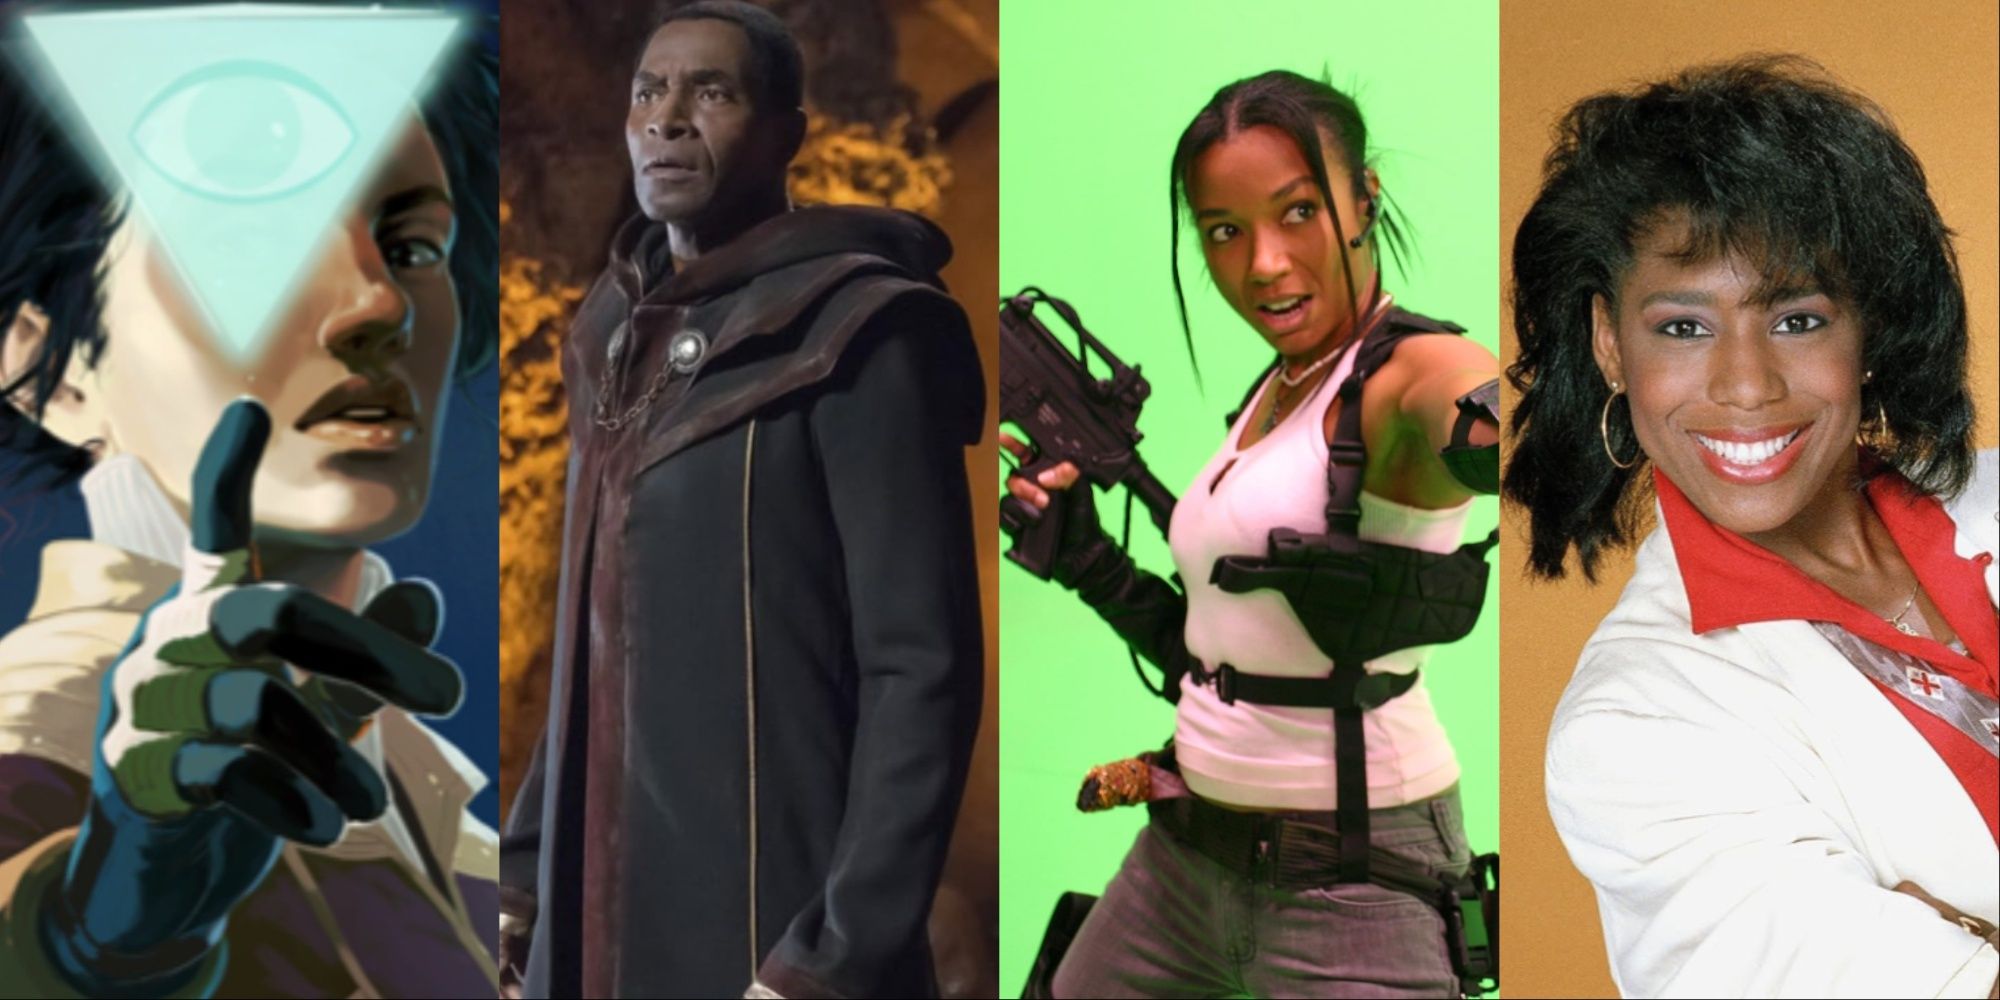 A four-image collage of the cover art for Tacoma, Carl Lumbly in Supergirl, Eva La Dare in costume as Sheva Alomar, and a younger Dawnn Lewis from sitcom A Different World.